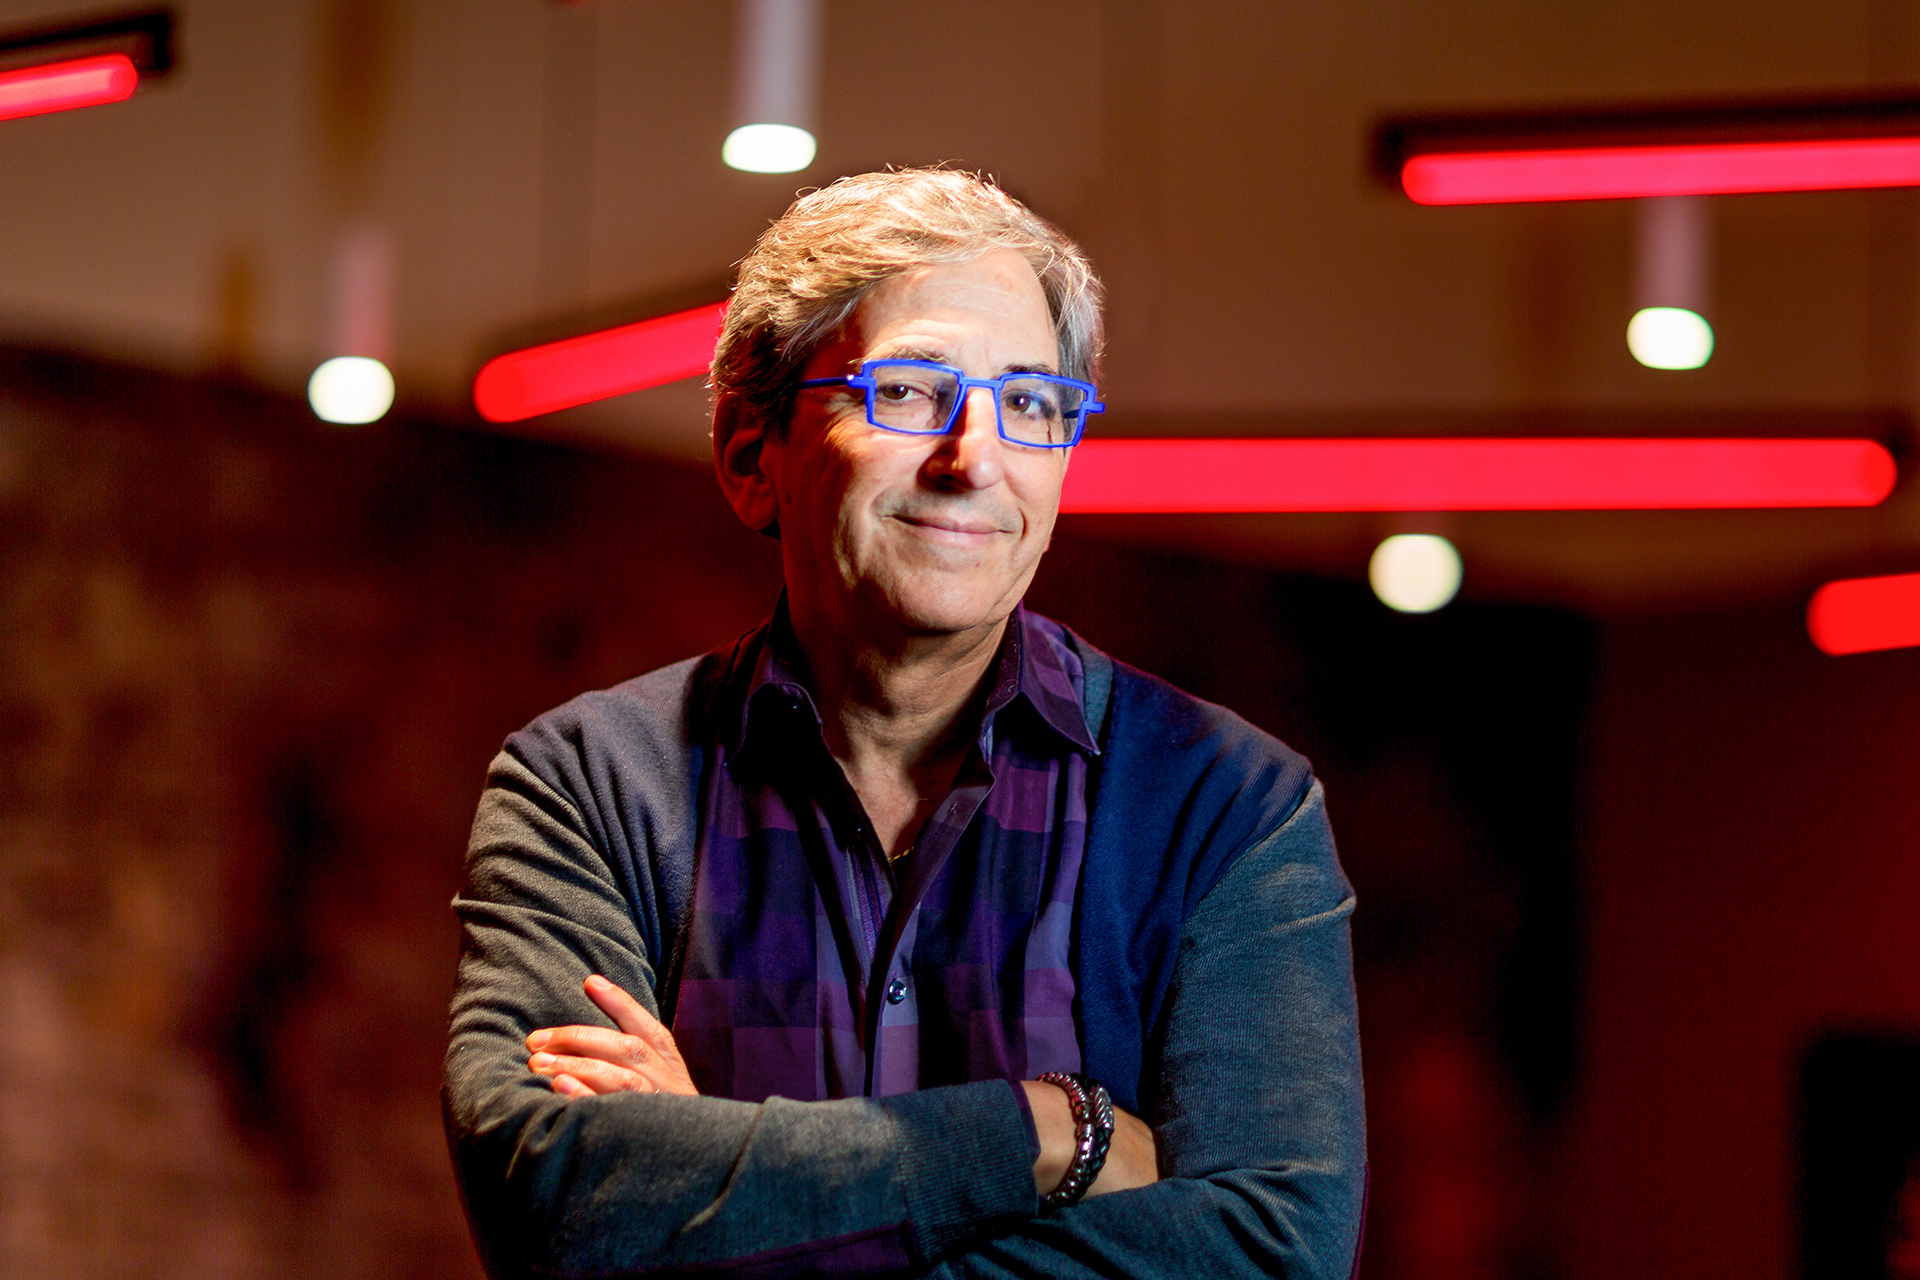 Norm Judah looks into the camera with arms folded, standing in front of red neon lighting